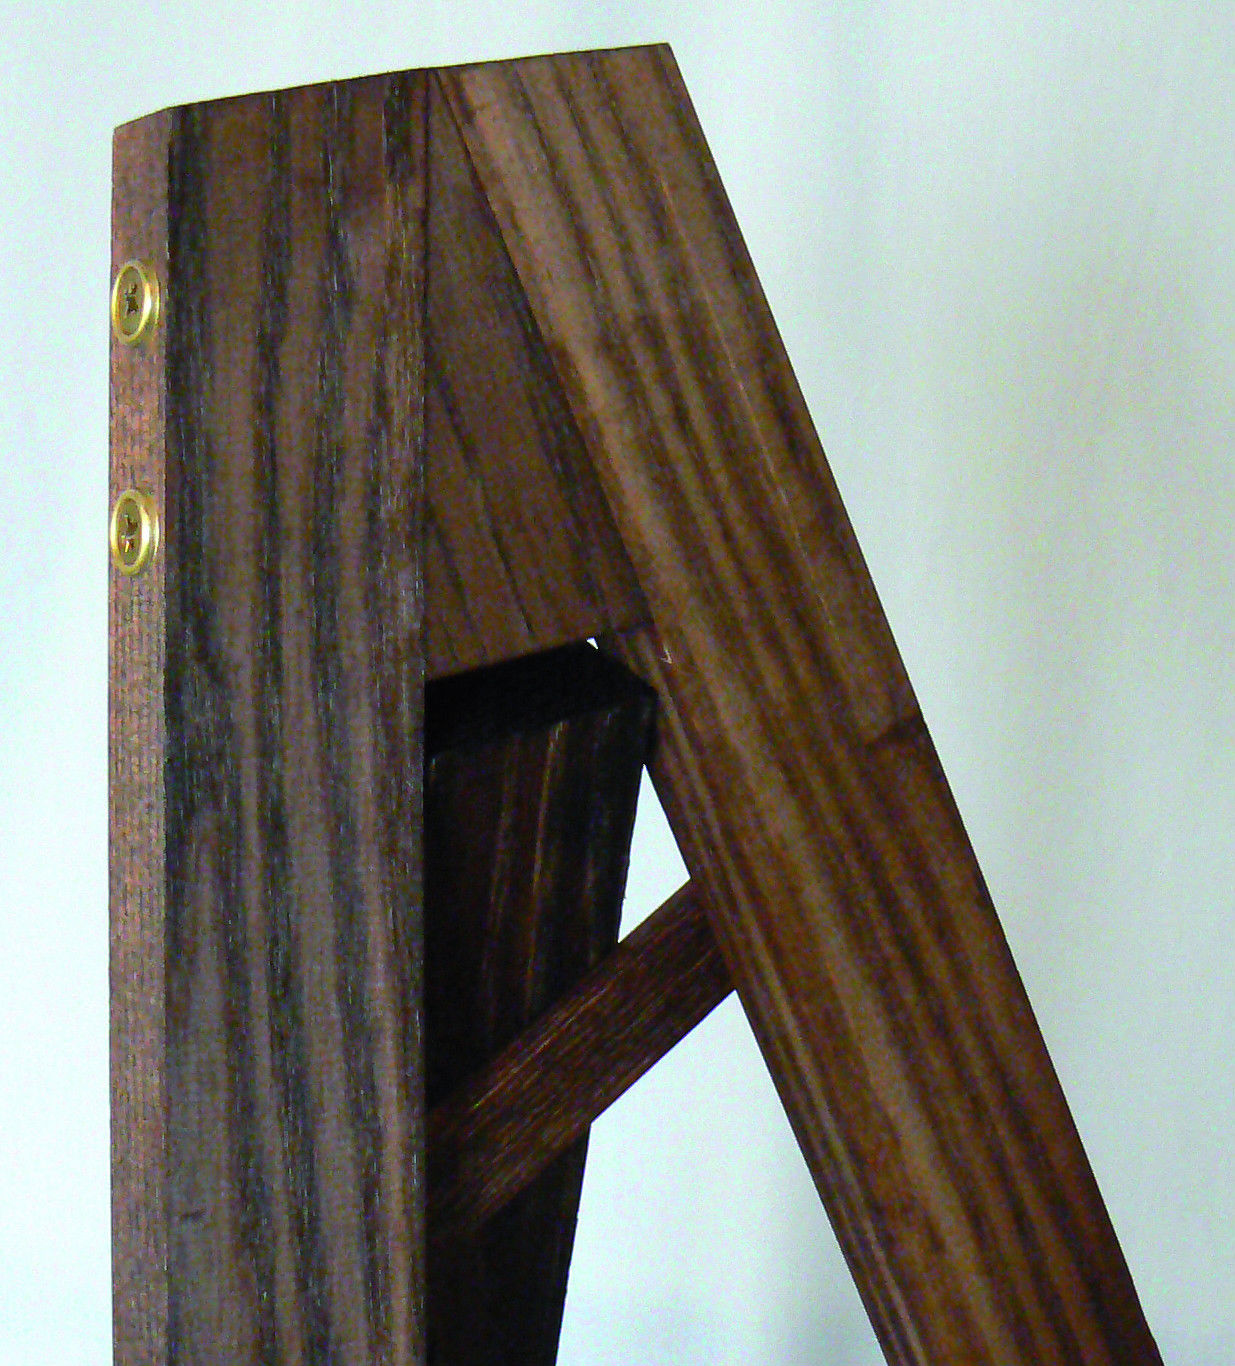 Large Easel 1450x740mm with blackboard 900x 600mm